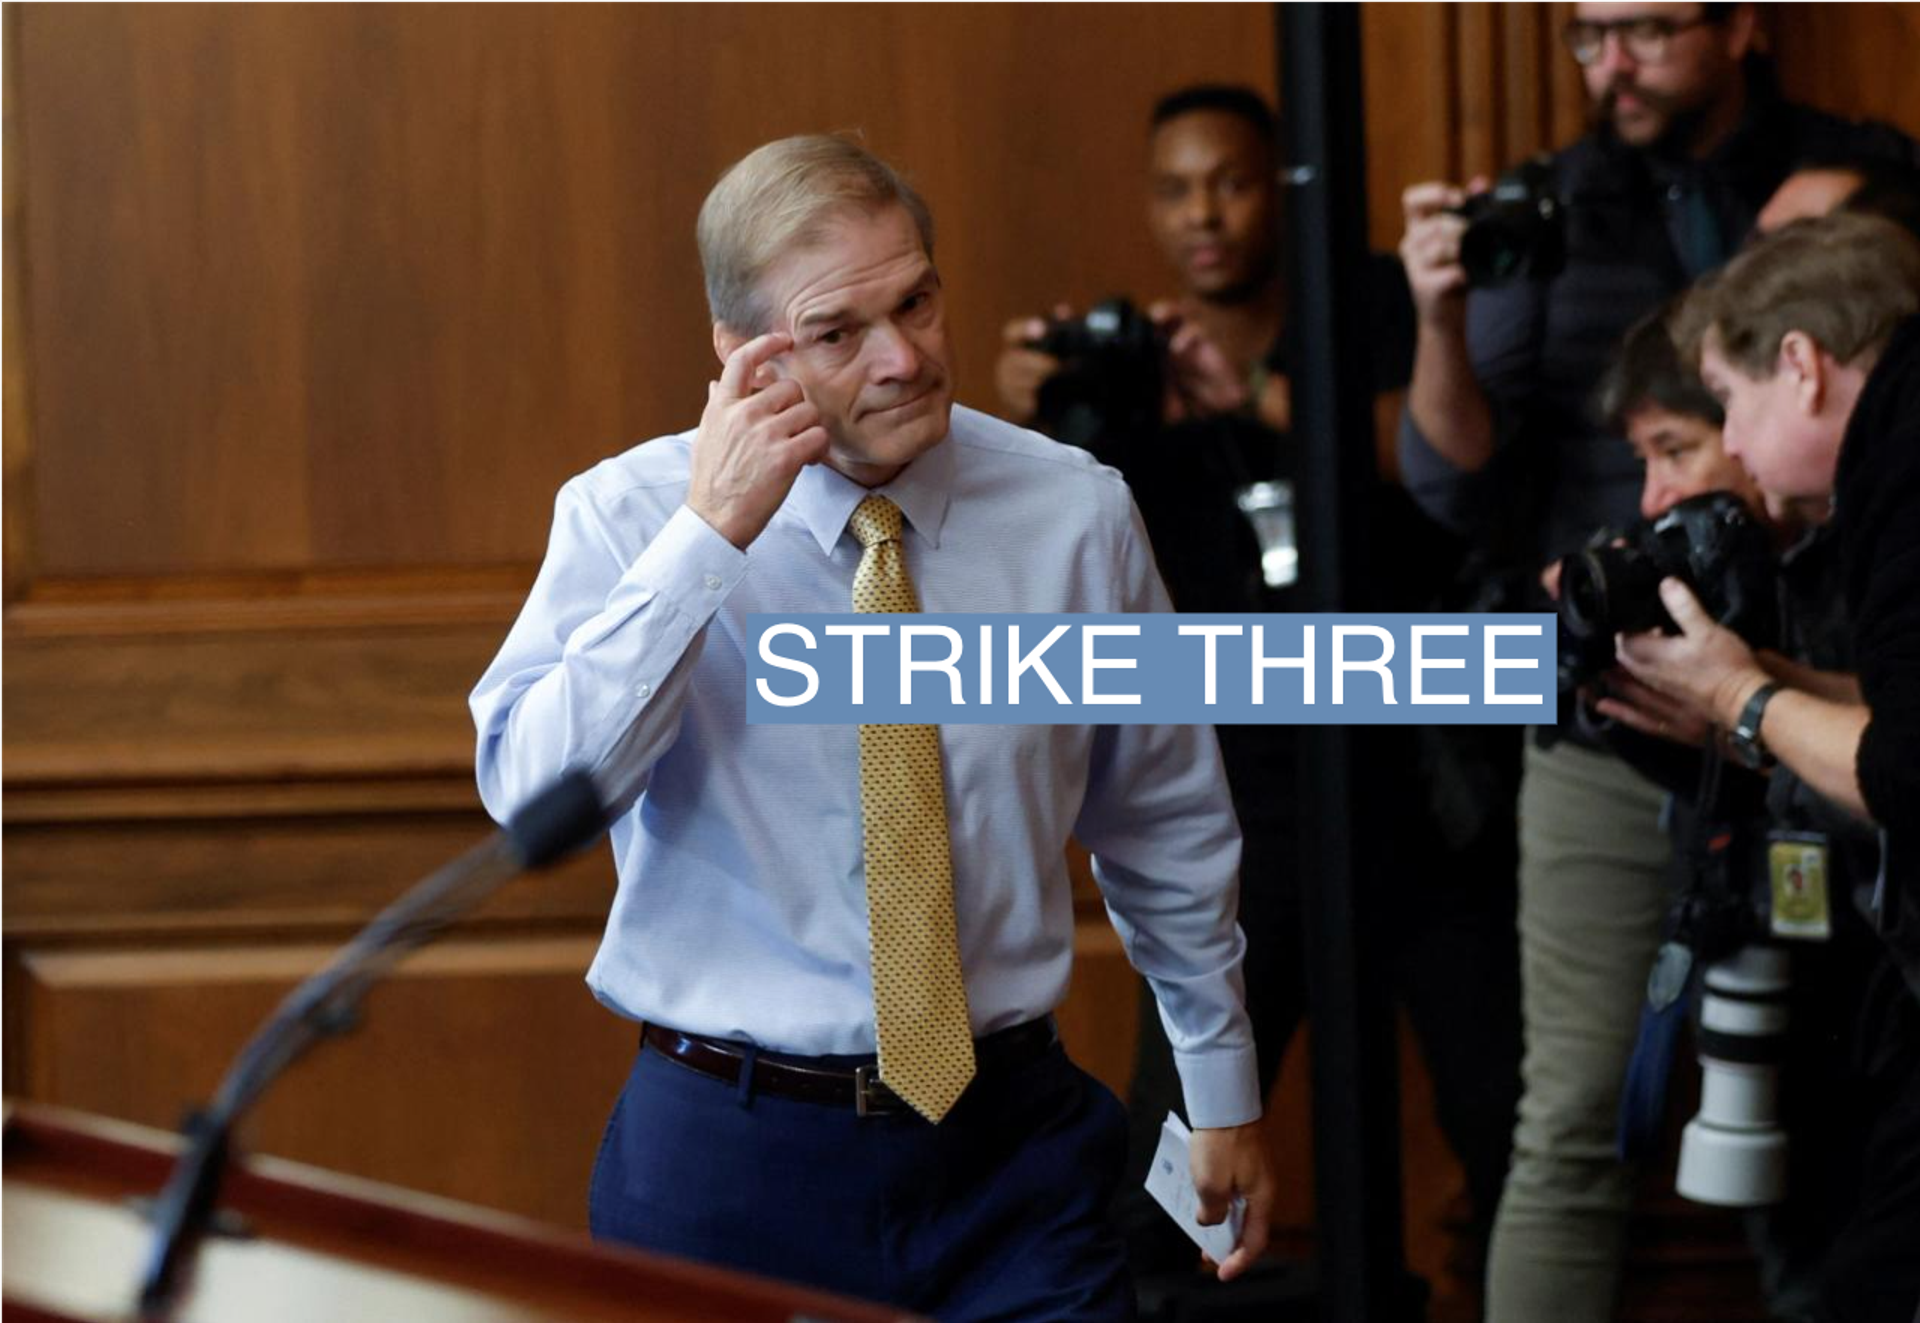 U.S. Rep. Jim Jordan arrives to hold an early morning press conference about his continuing bid to become the next Speaker of the House of Representatives.